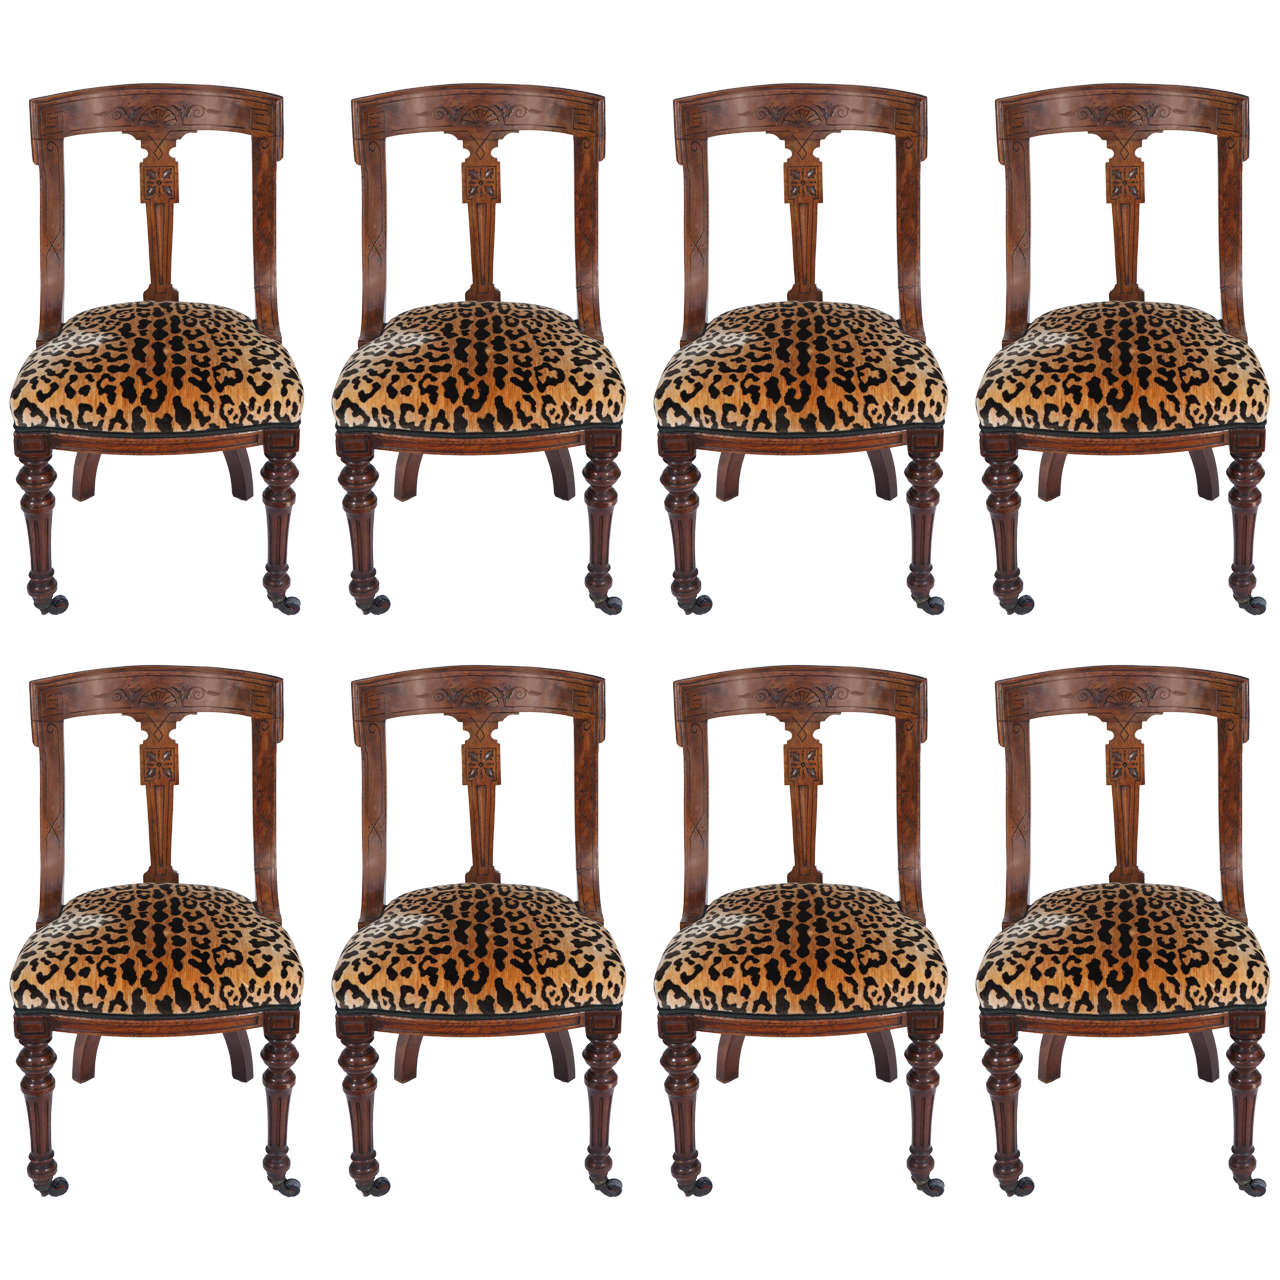 Group of Eight 19th Century English Walnut Dining Chairs